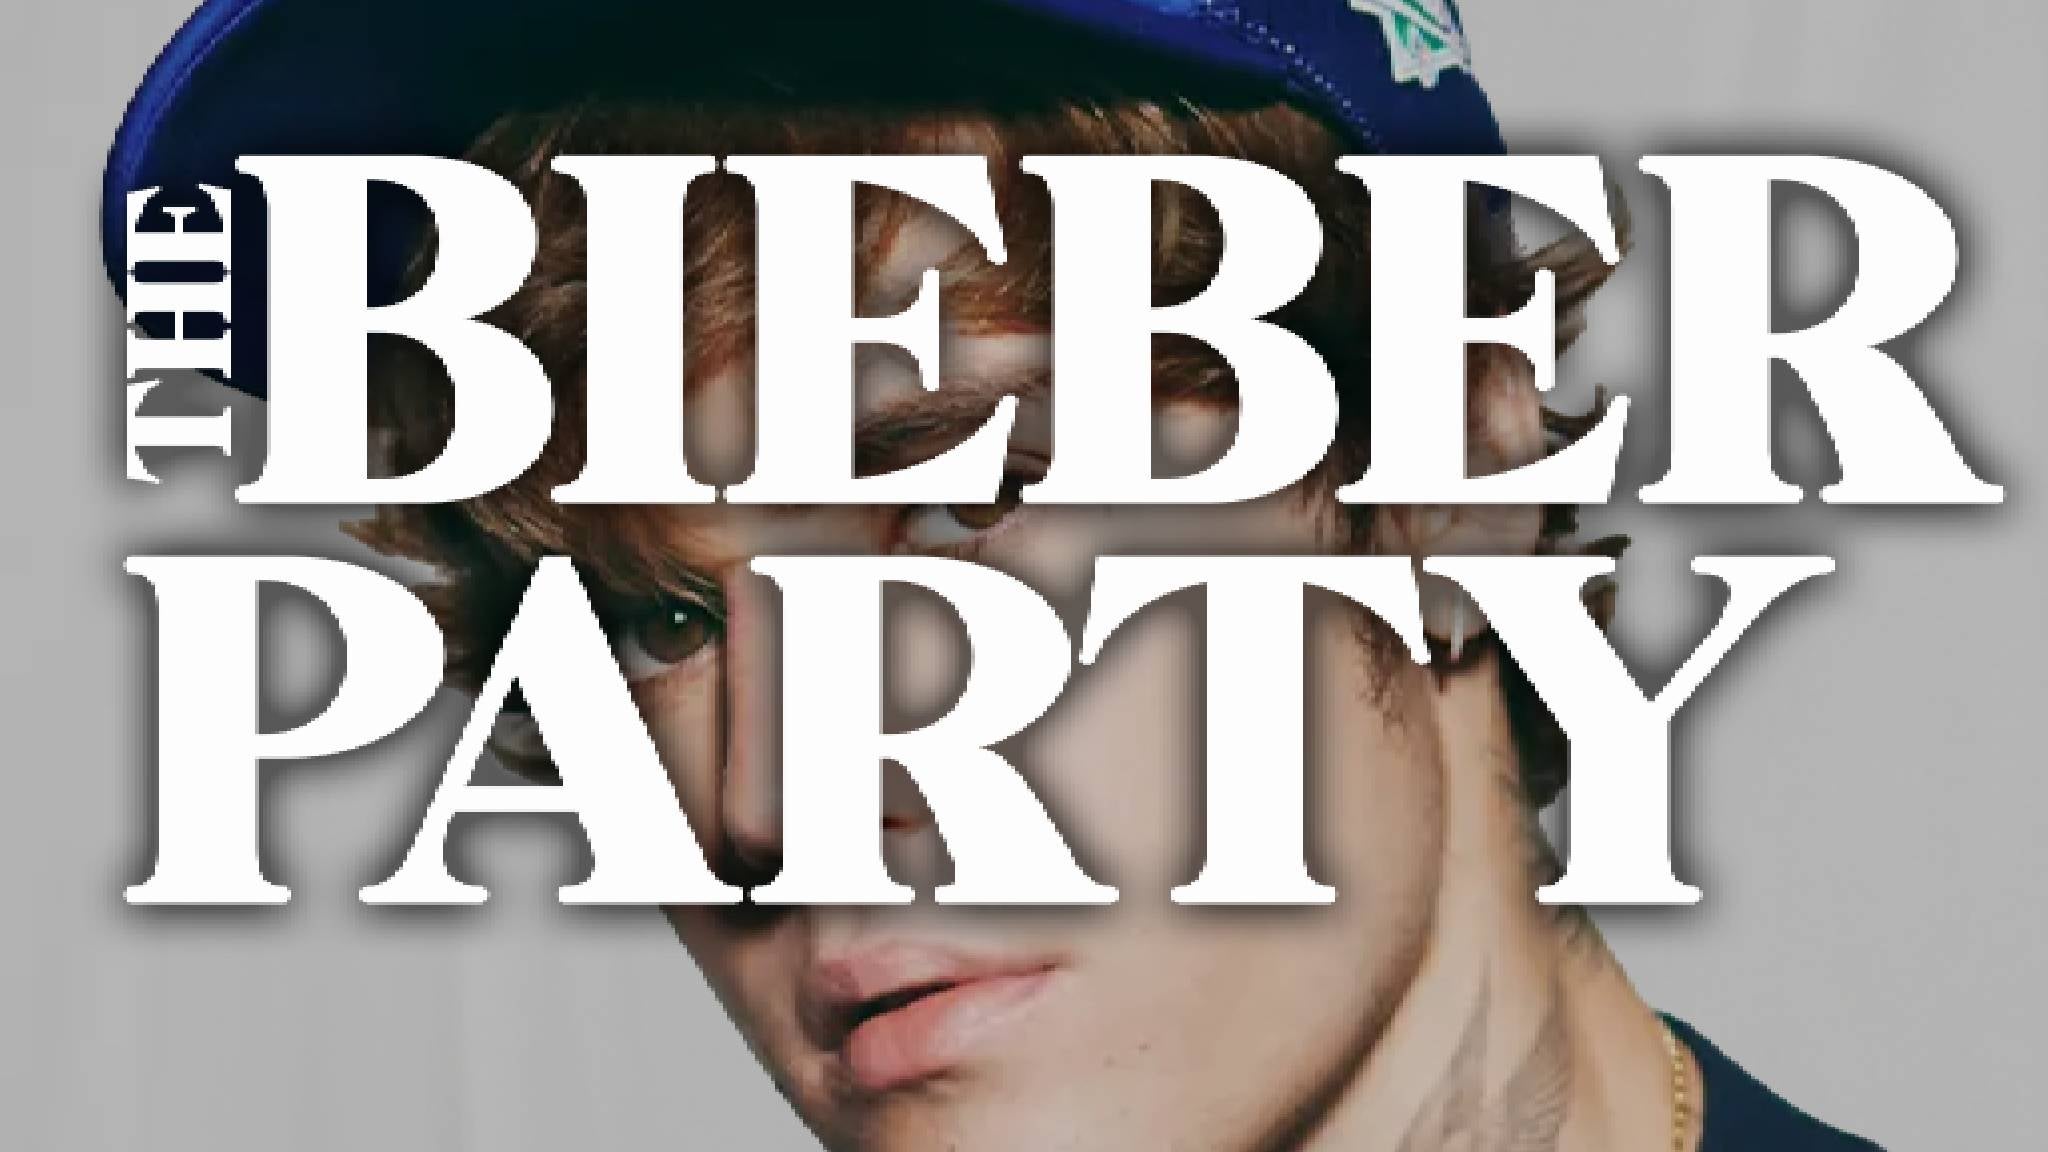 The Bieber Party: Justin Bieber Night in Albany promo photo for Artist presale offer code